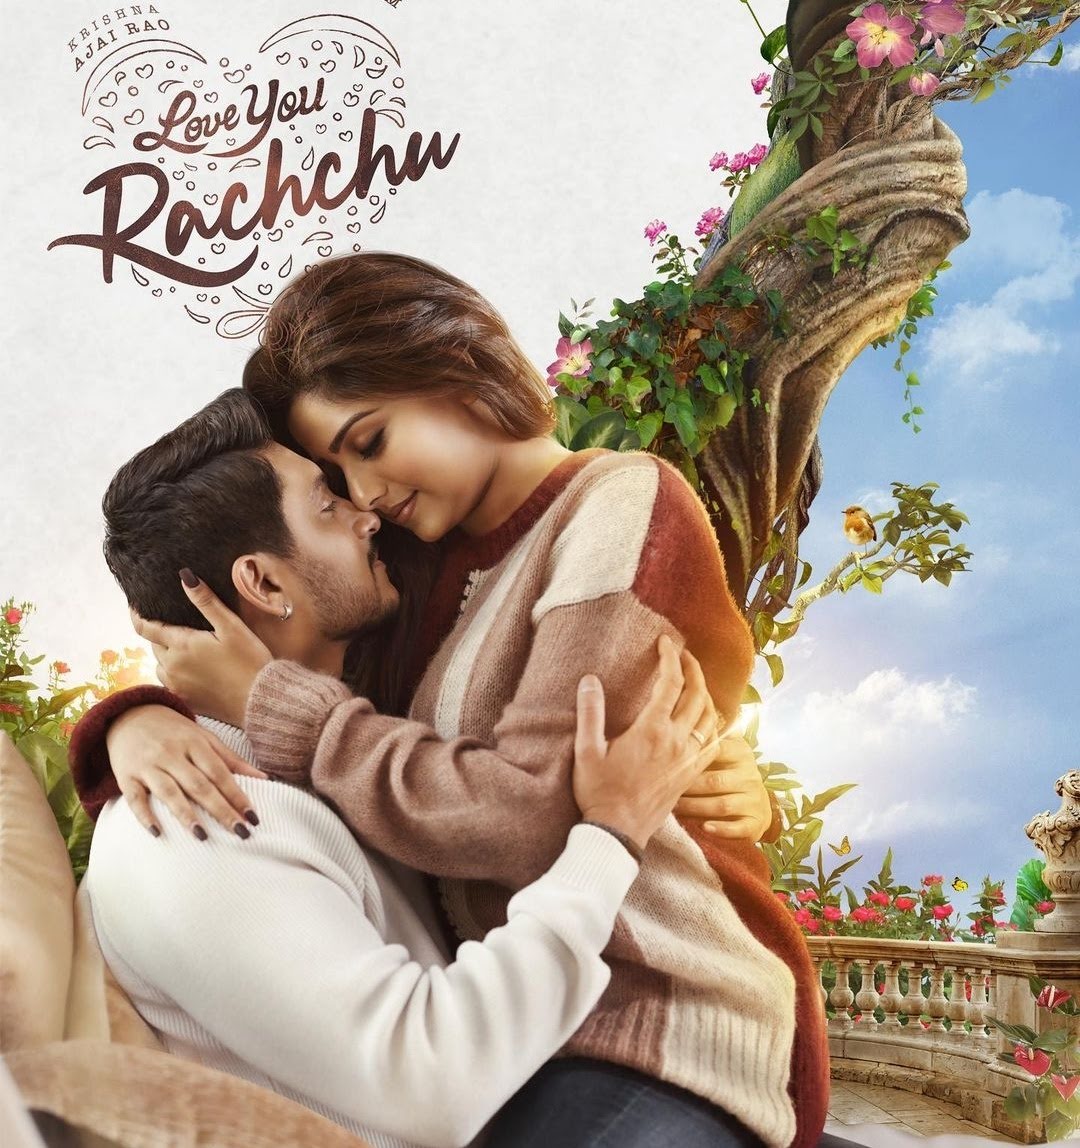 Download Love you Rachchu in HD from Tamilrockers